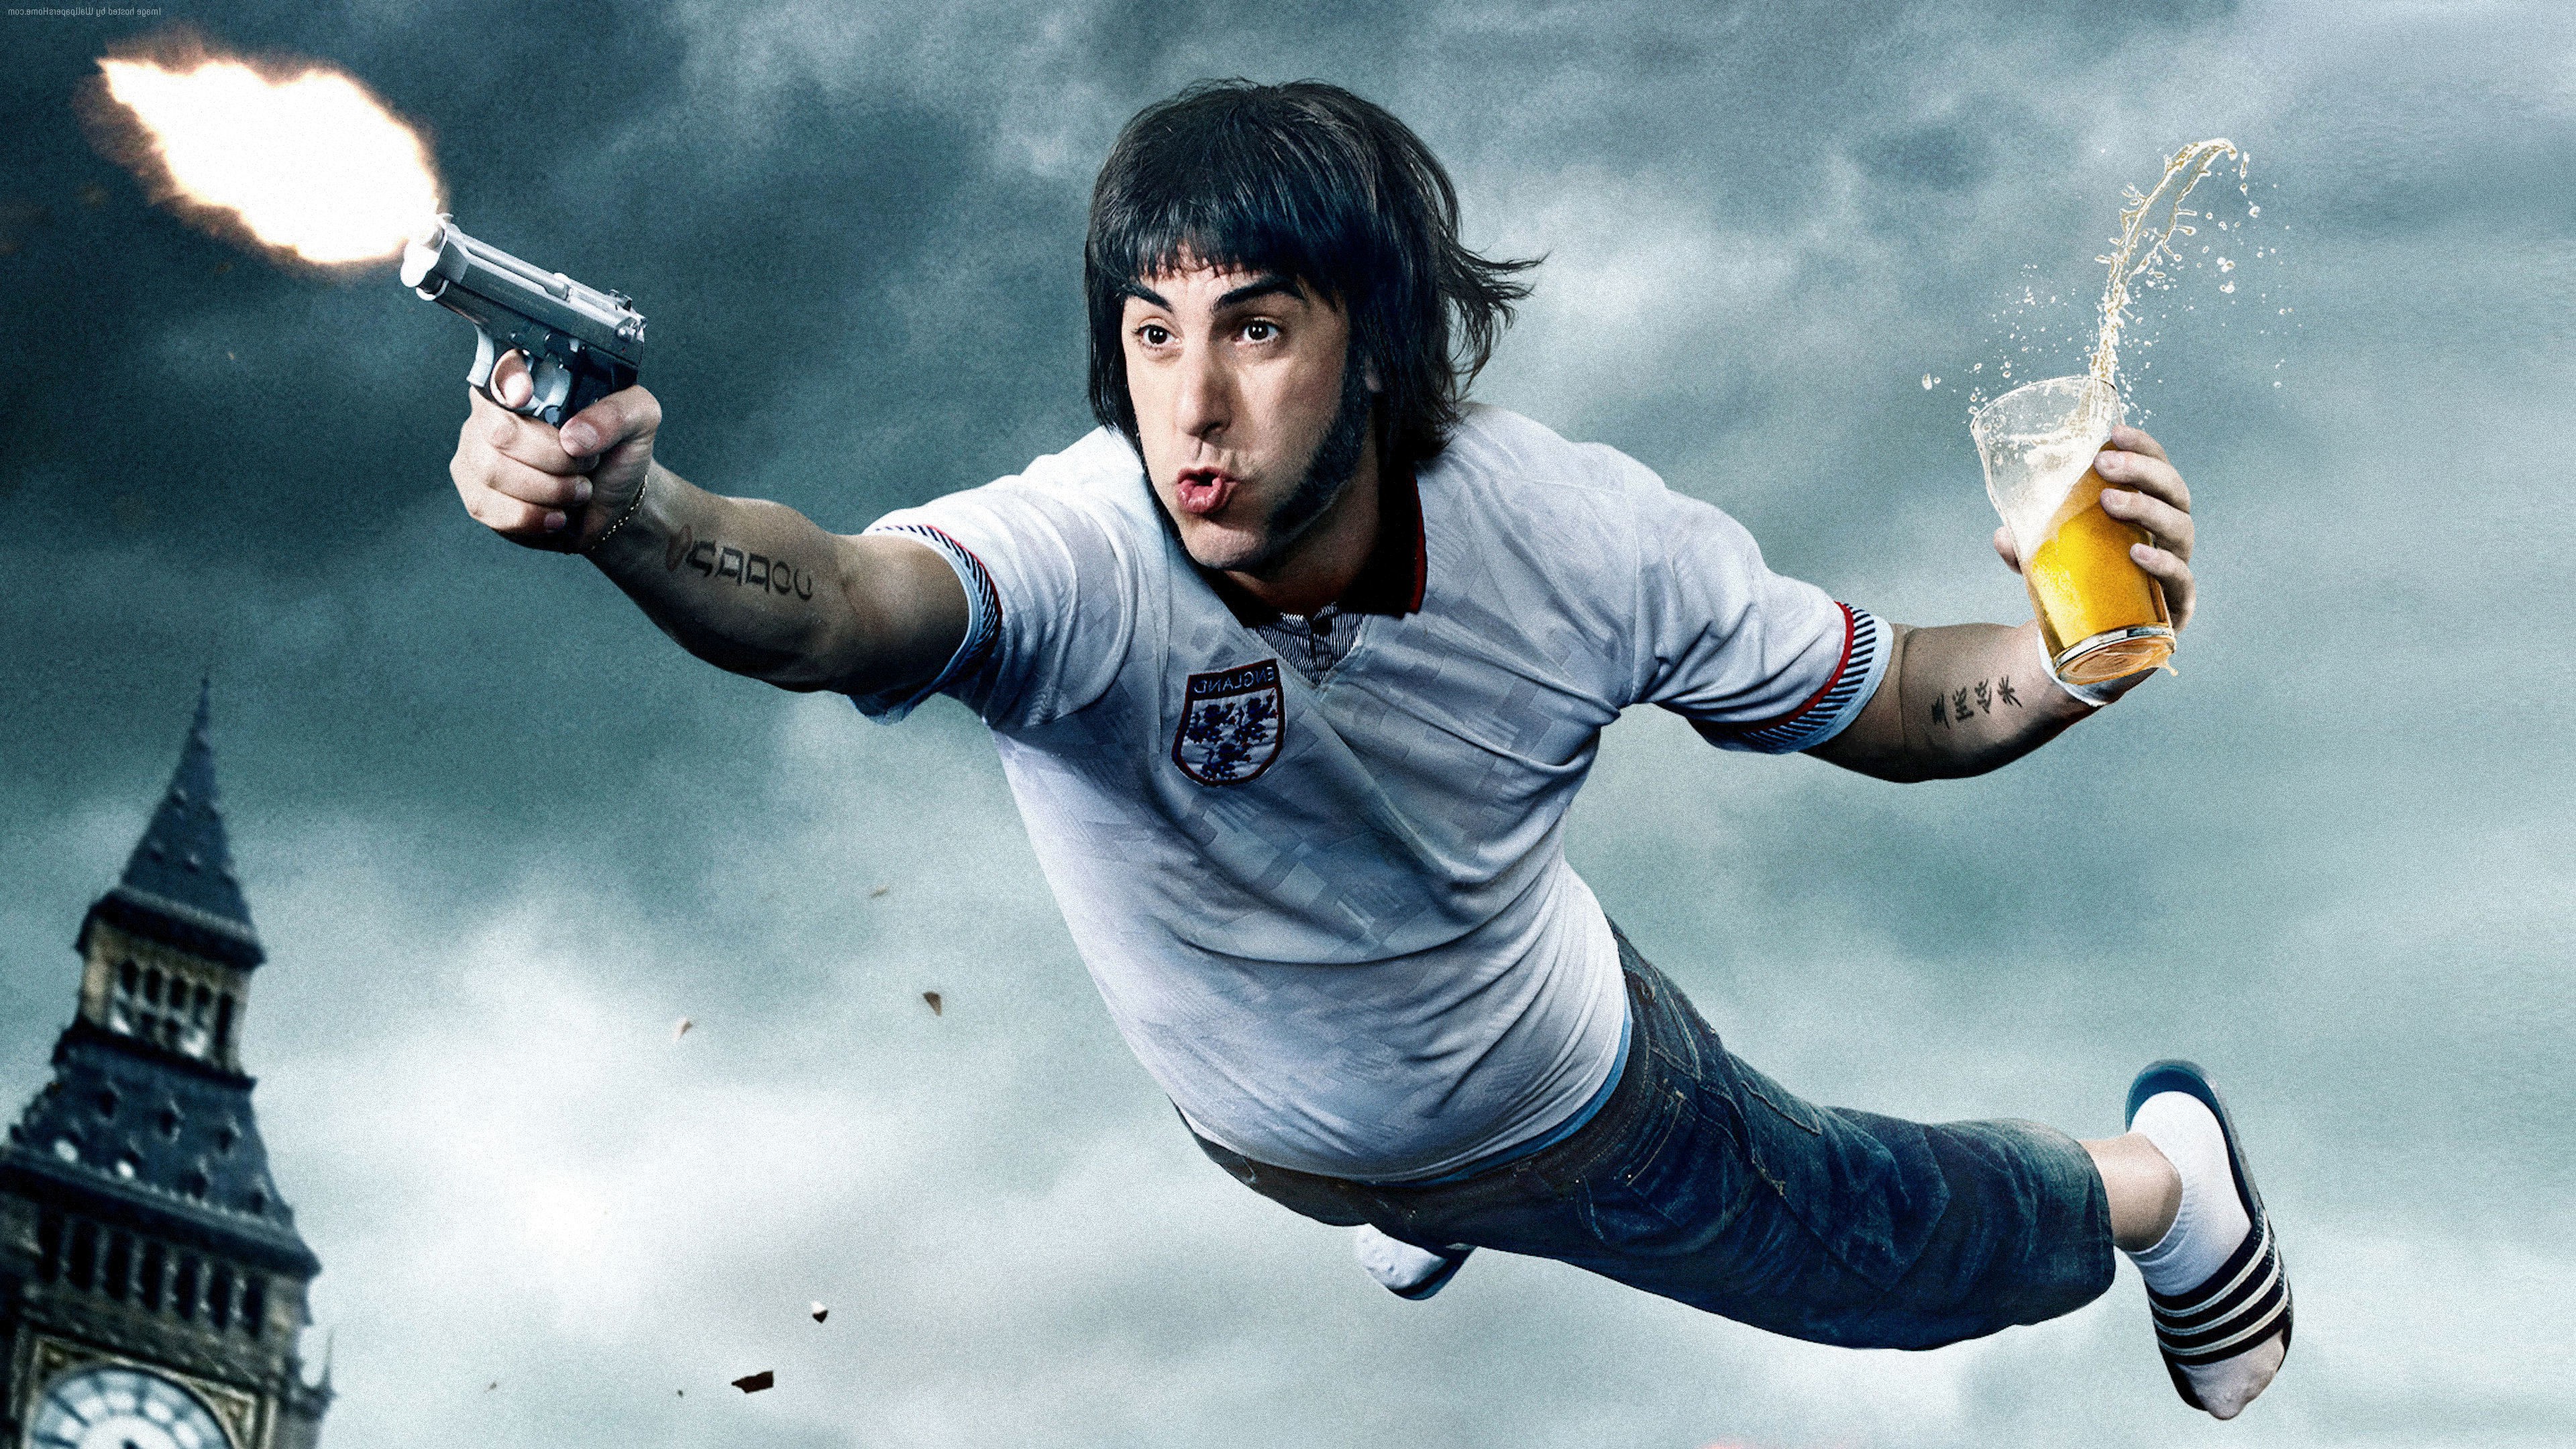 The Brothers Grimsby 4K Wallpapers   New HD Wallpapers